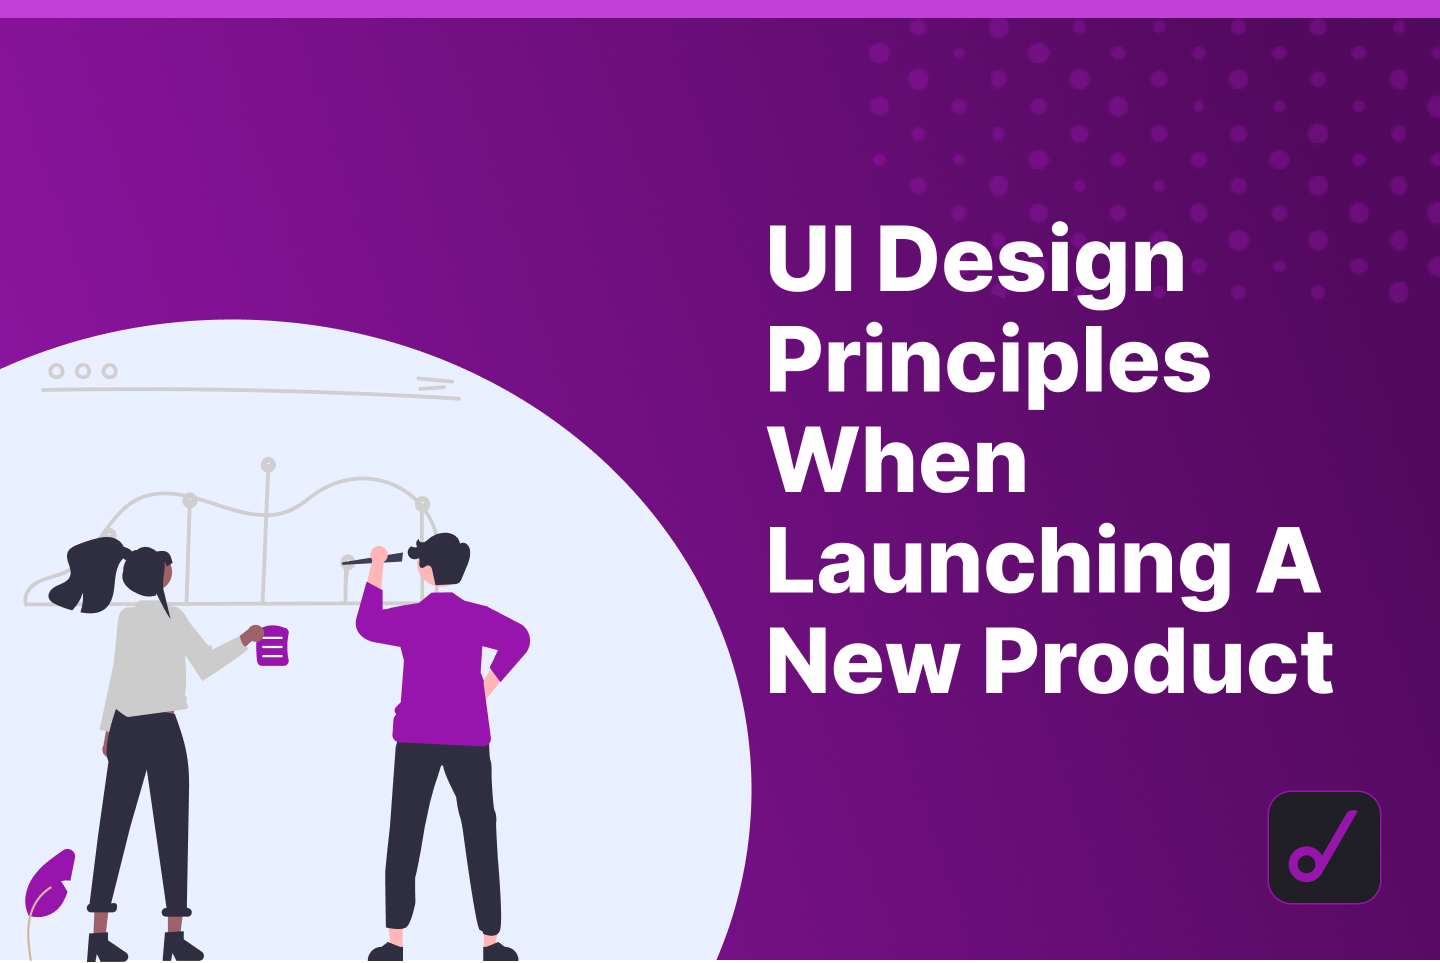 User Interface Design Principles to Implement When Launching a New Product